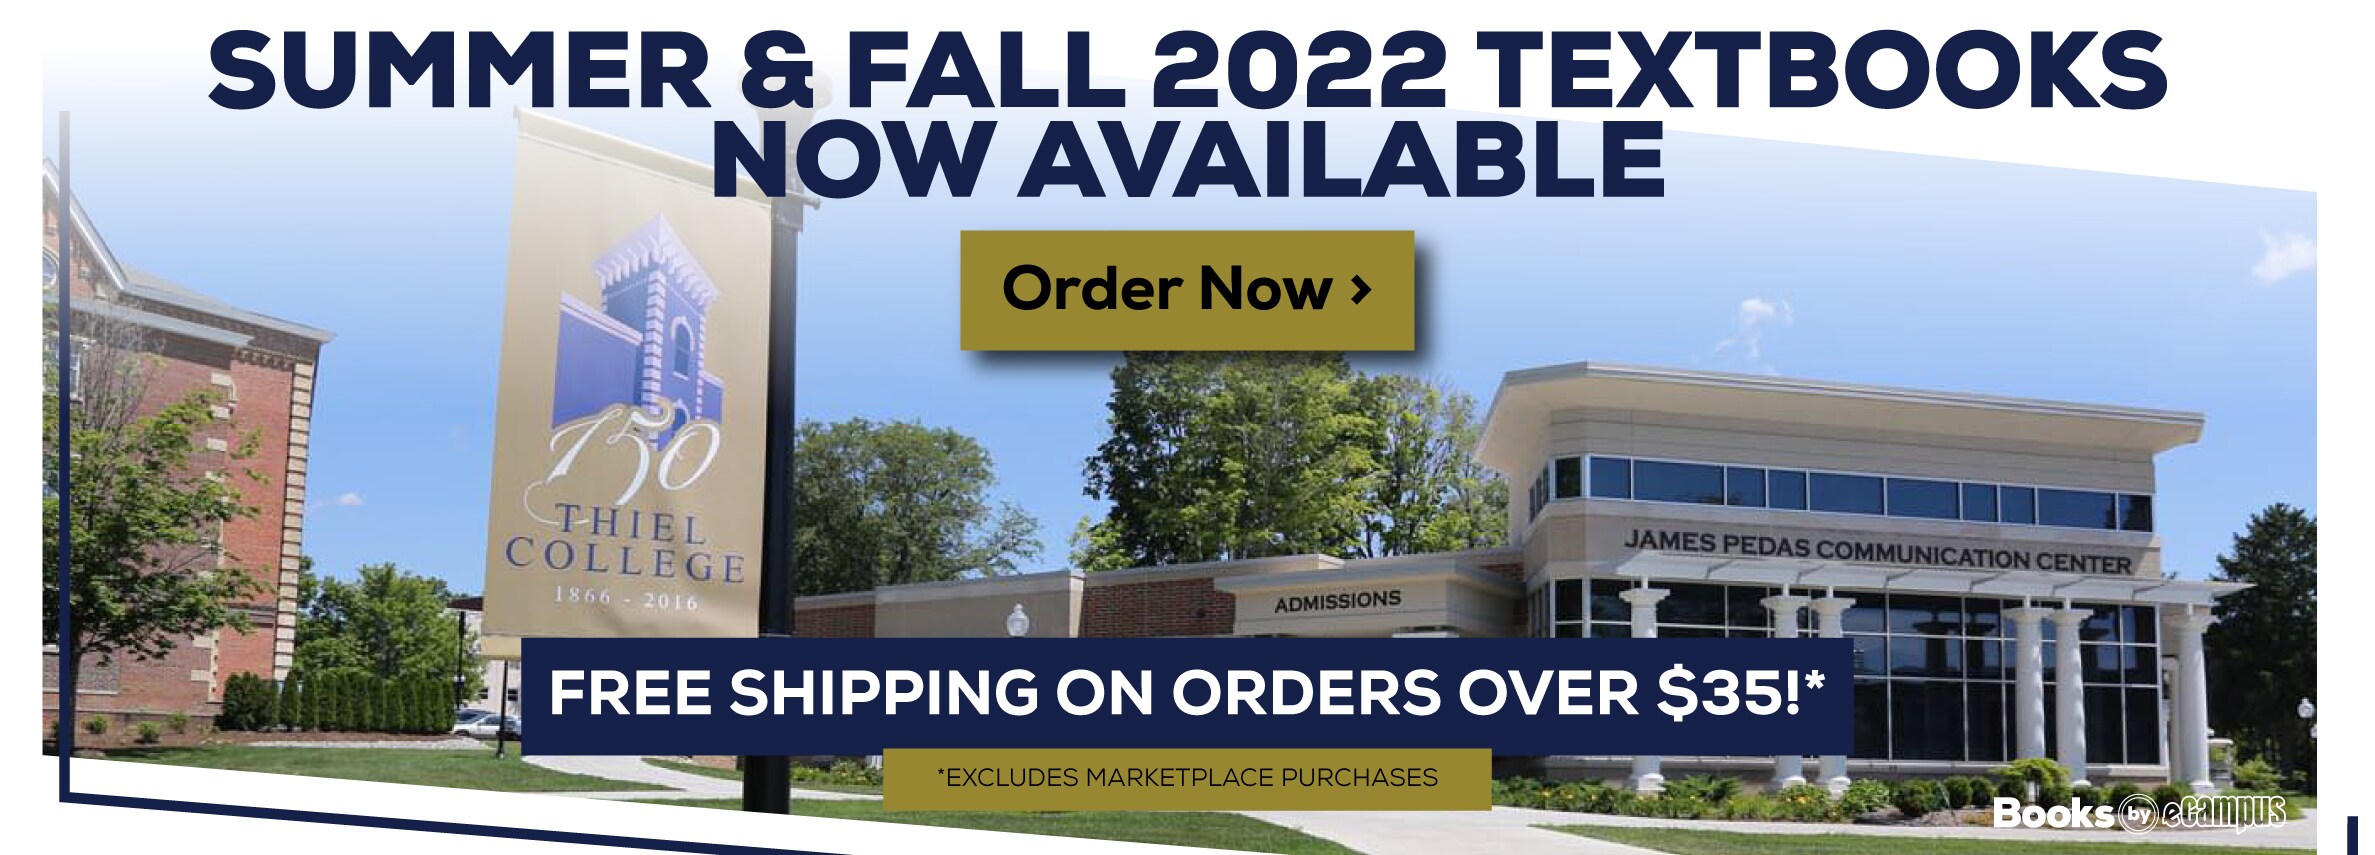 Summer and Fall 2022 Textbooks Now Available. Free shipping on all orders over $35! Excludes Marketplace Purchases. Order now